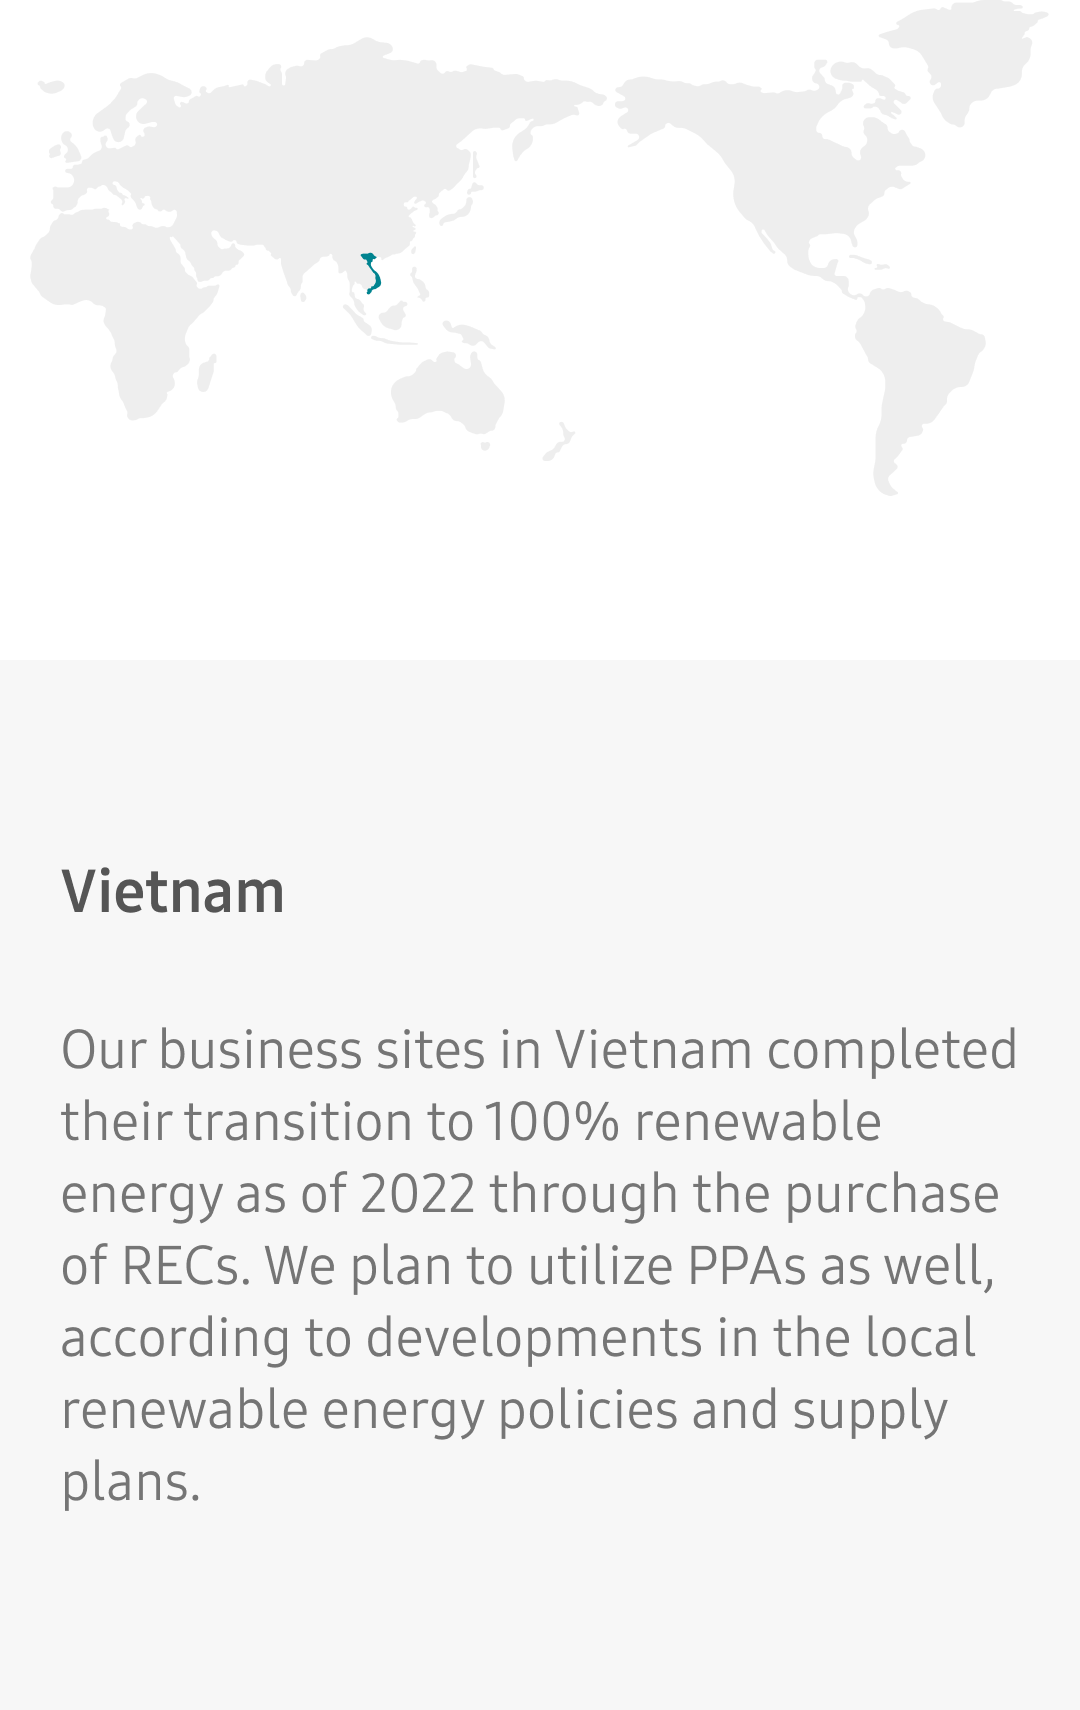 Our business sites in Vietnam completed their transition to 100% renewable energy as of 2022 through the purchase of RECs. We plan to utilize PPAs as well, according to developments in the local renewable energy policies and supply plans.